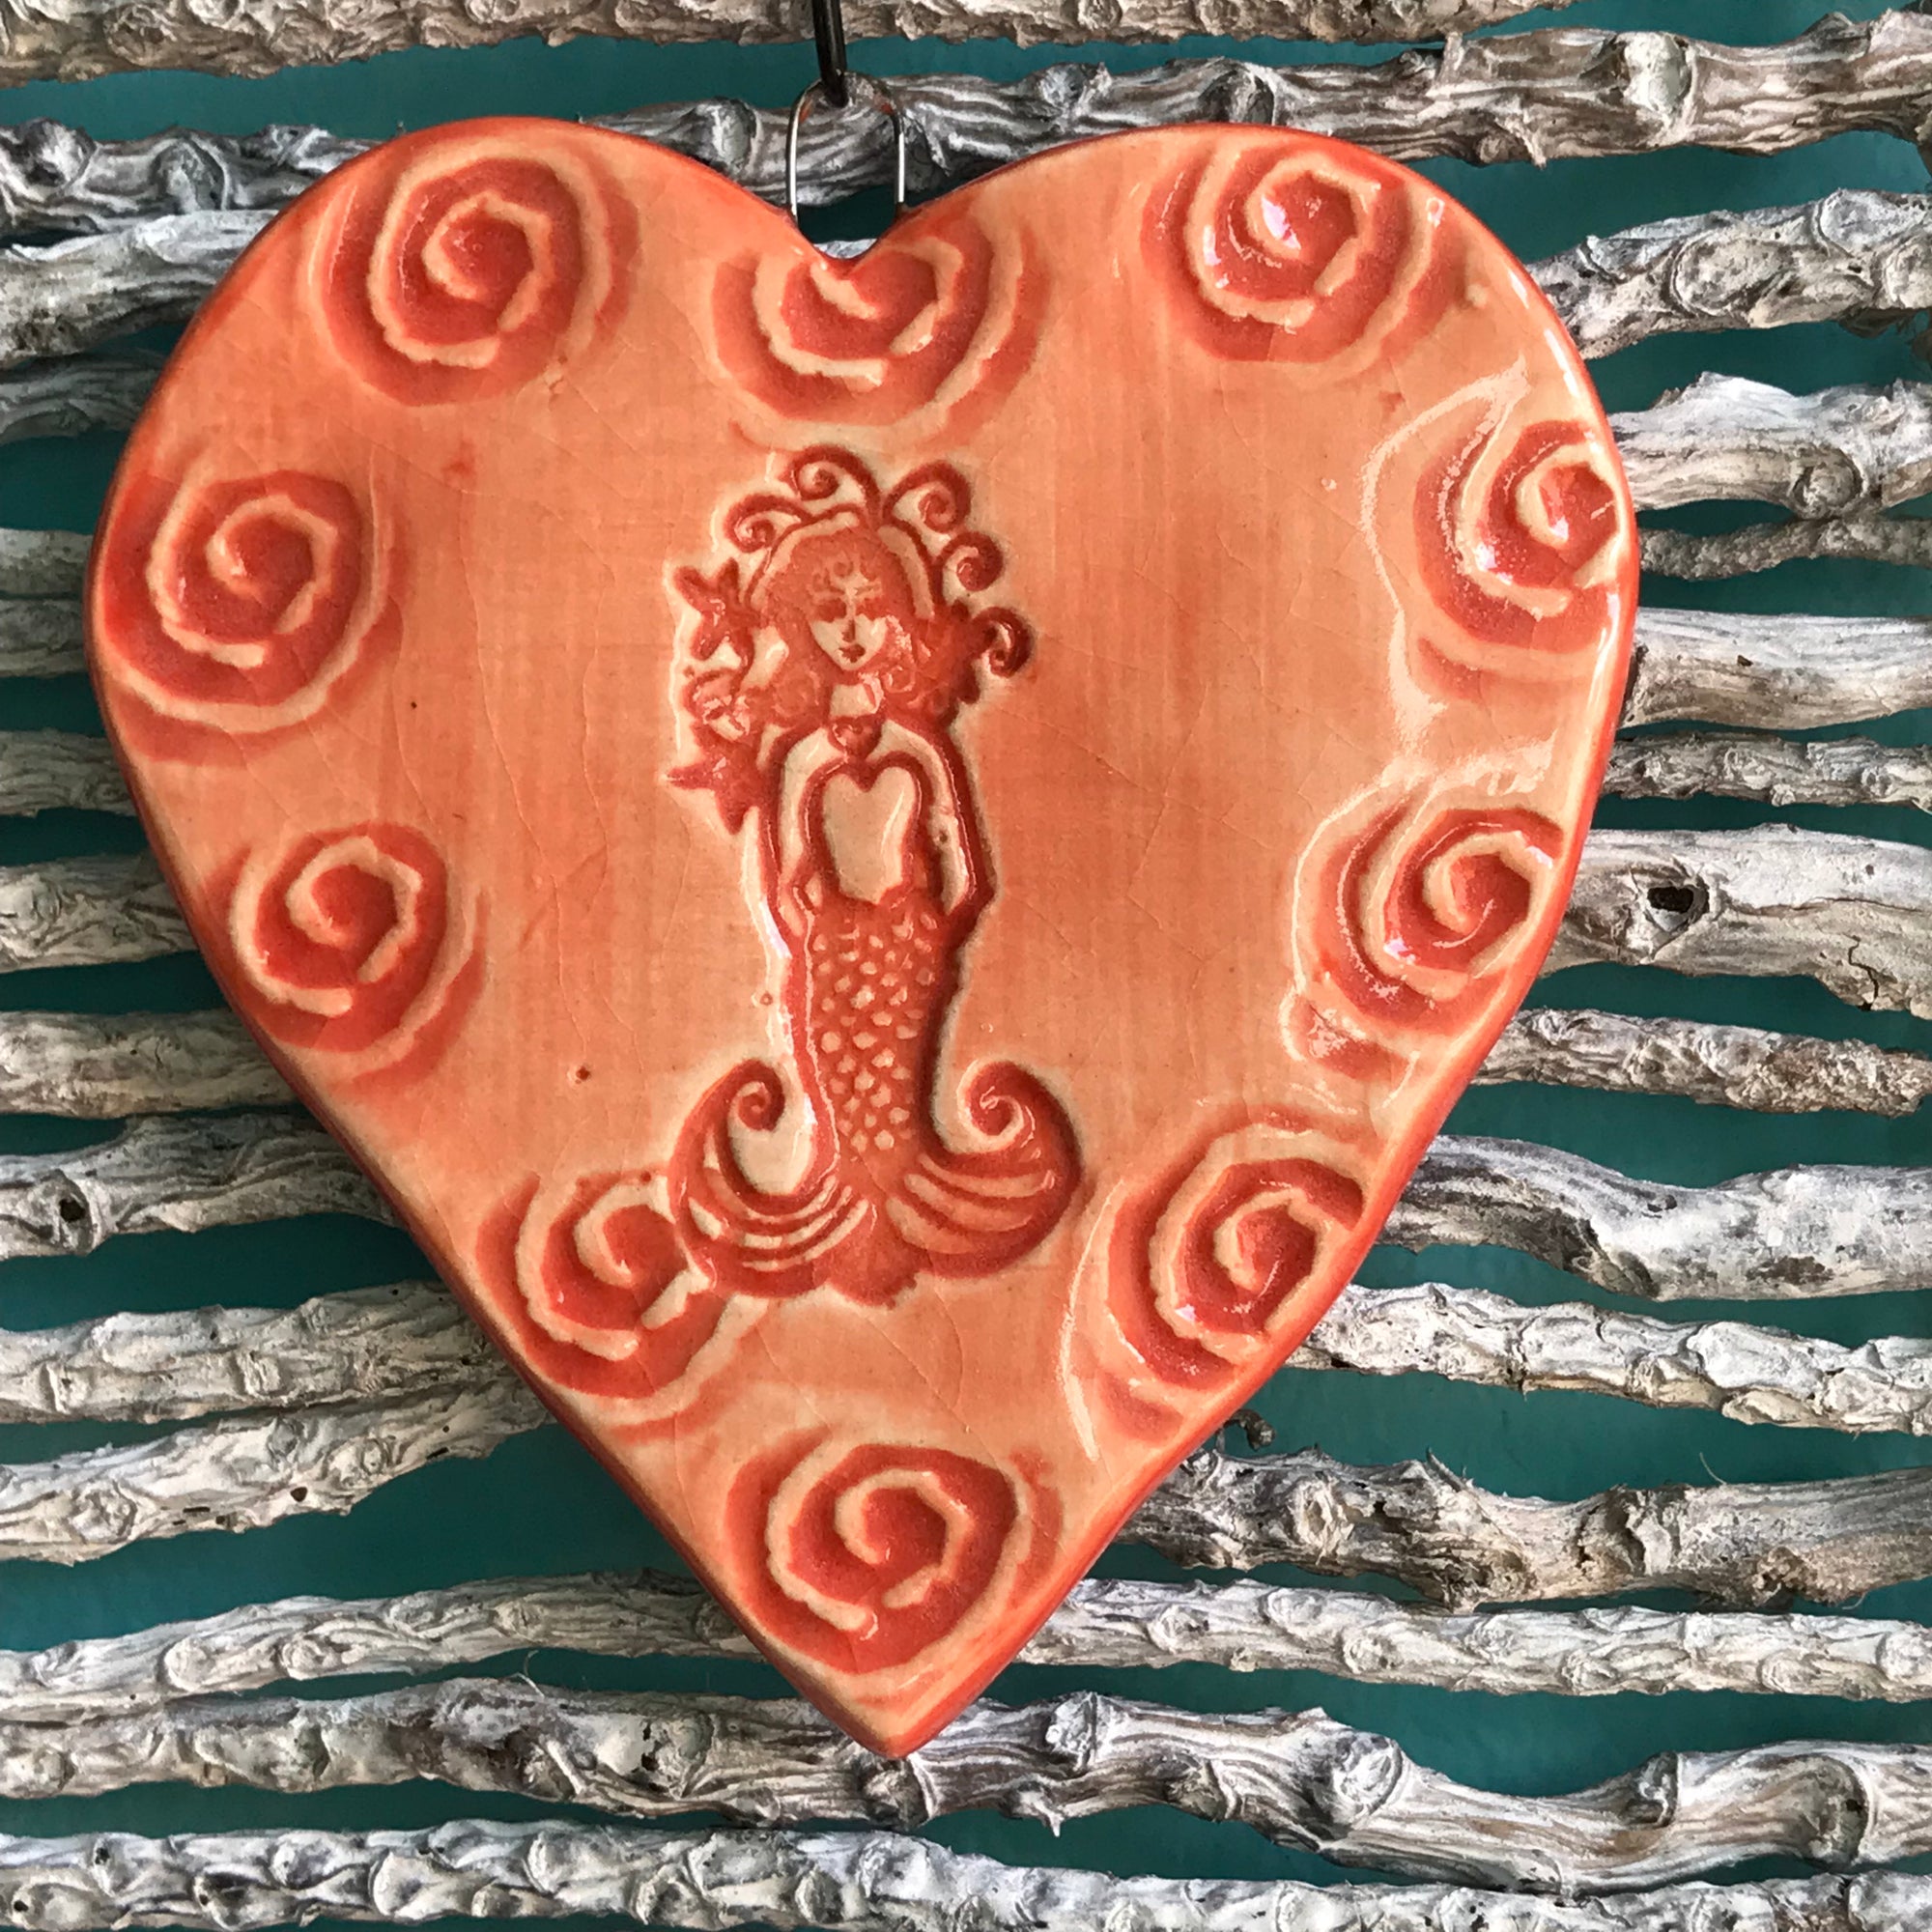 A mermaid ornament glazed in brilliant coral glaze.  Handmade and each has its own character.